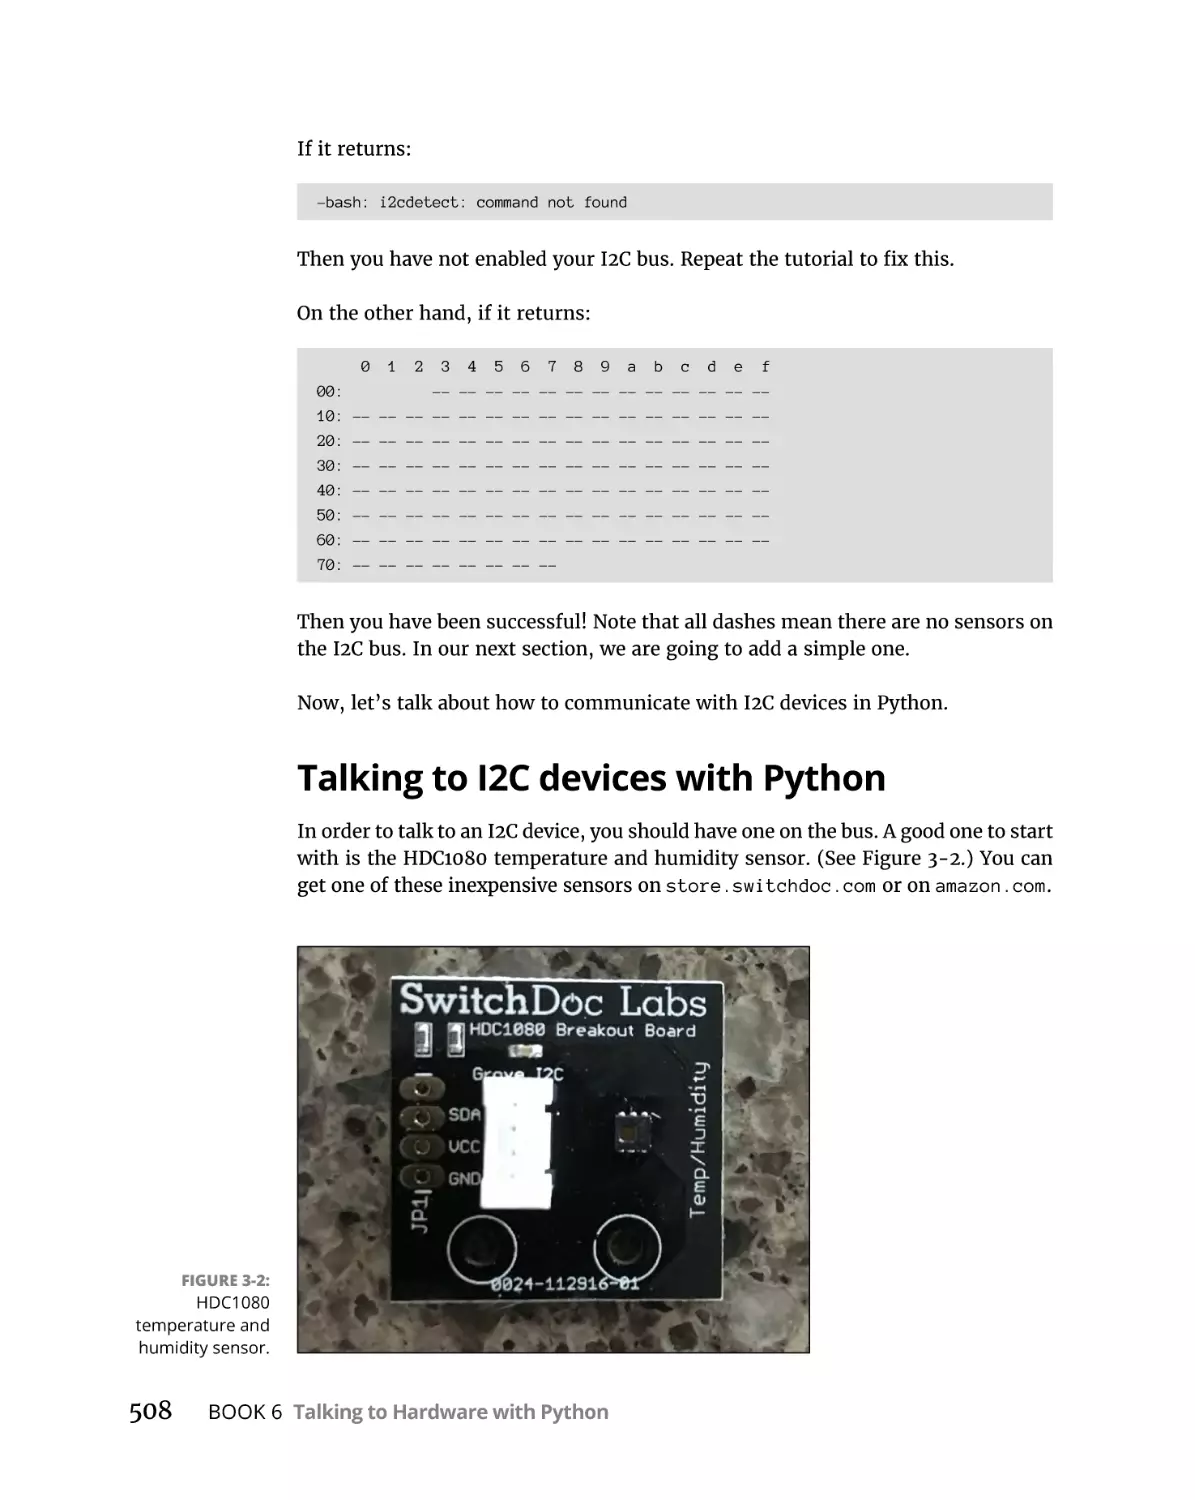 Talking to I2C devices with Python